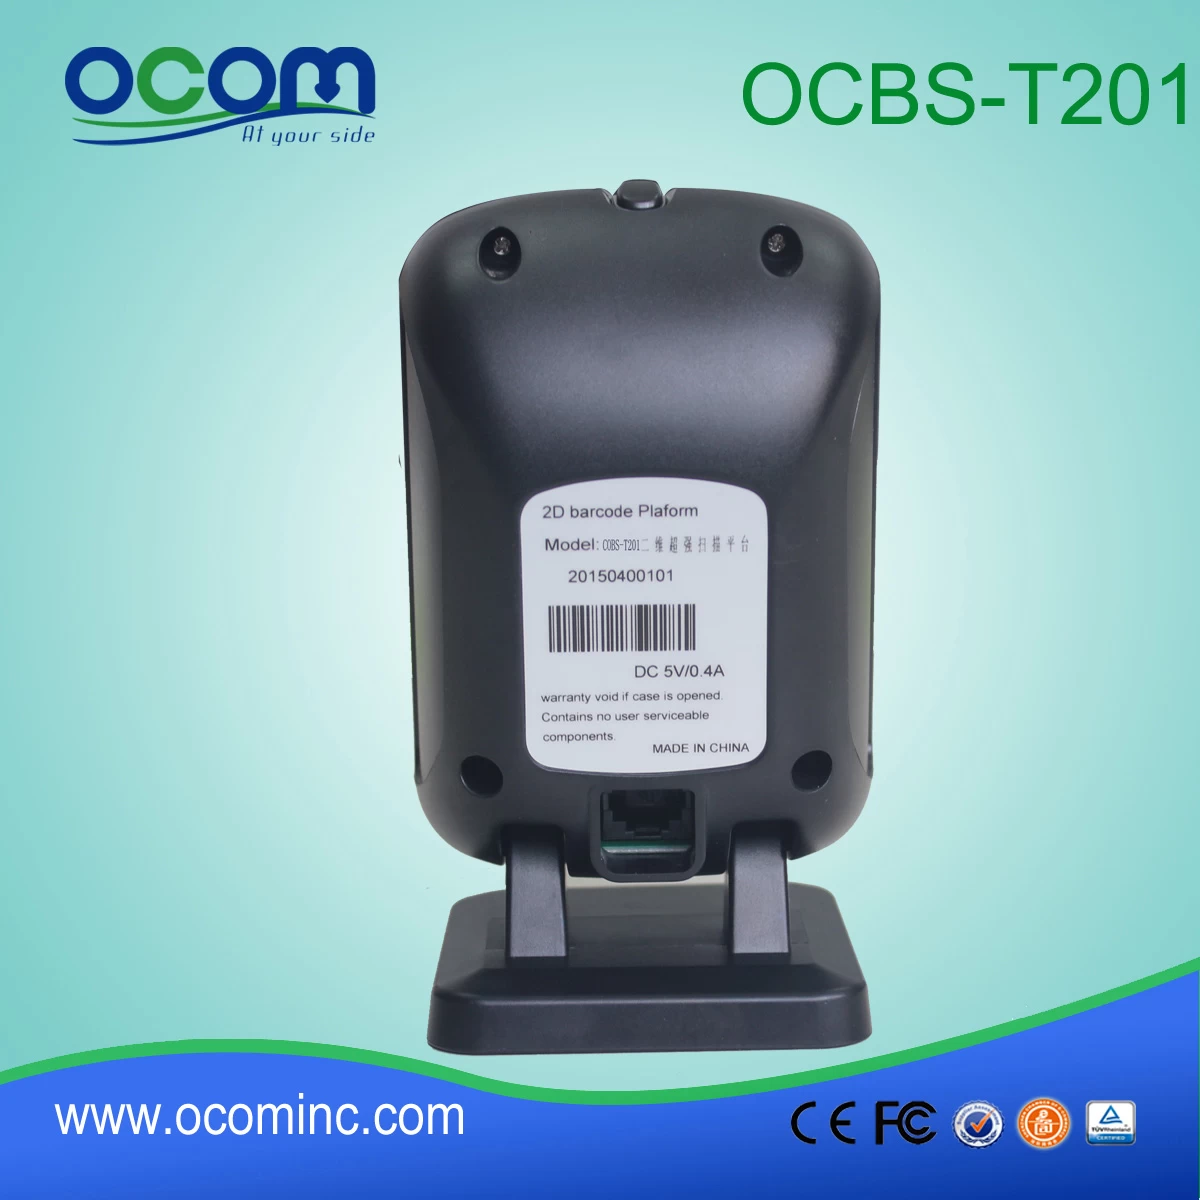 OCBS-T201:new supply barcode reader price, tablet with barcode reader